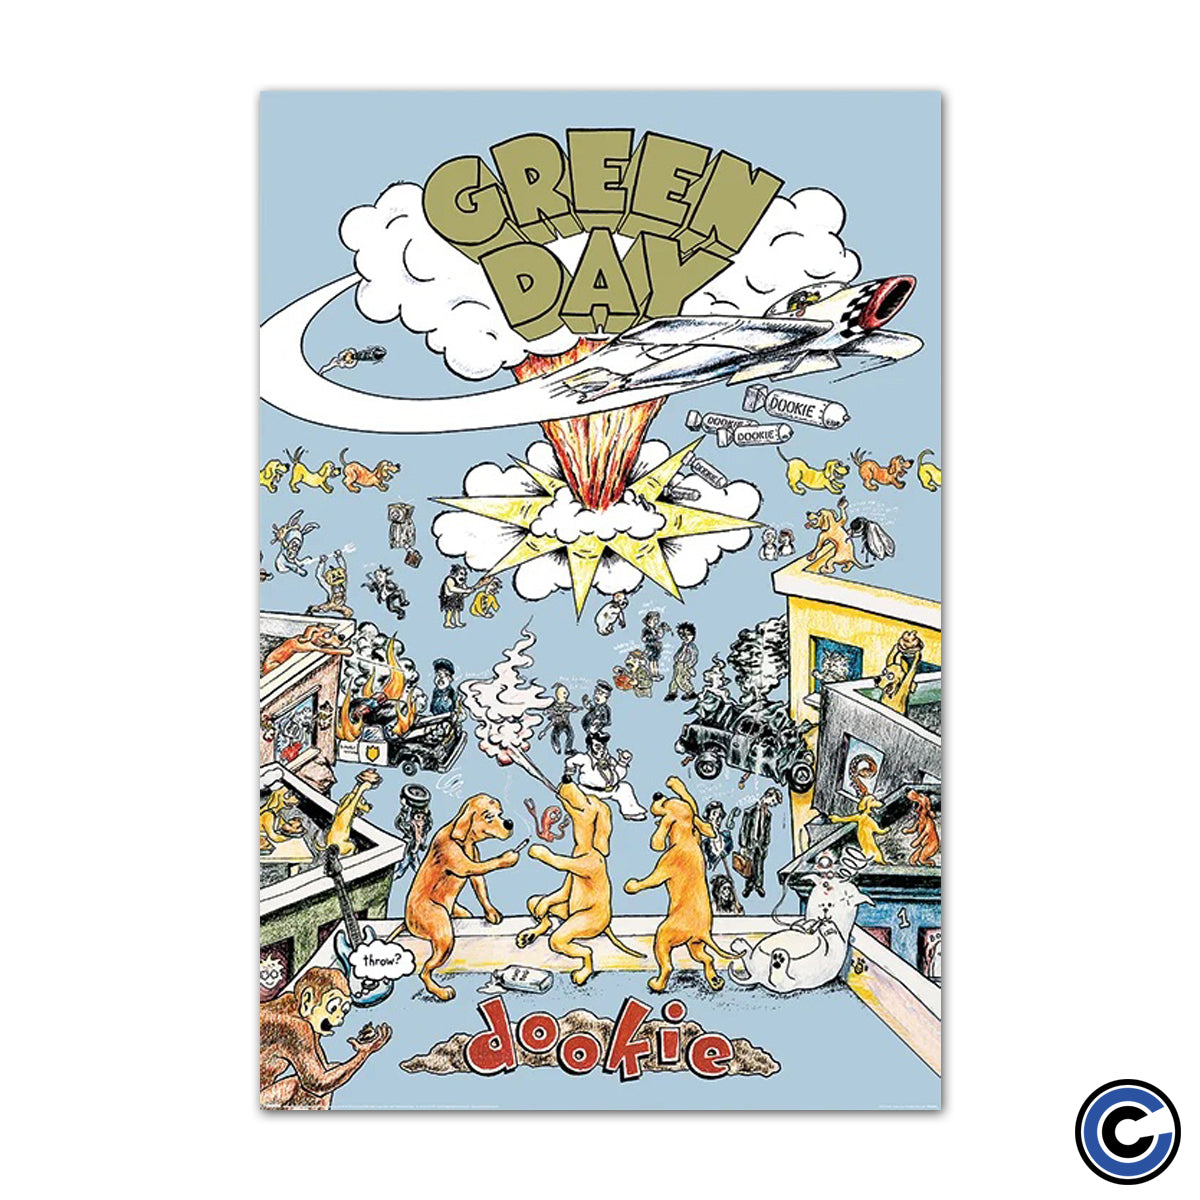 Green Day "Dookie" Poster